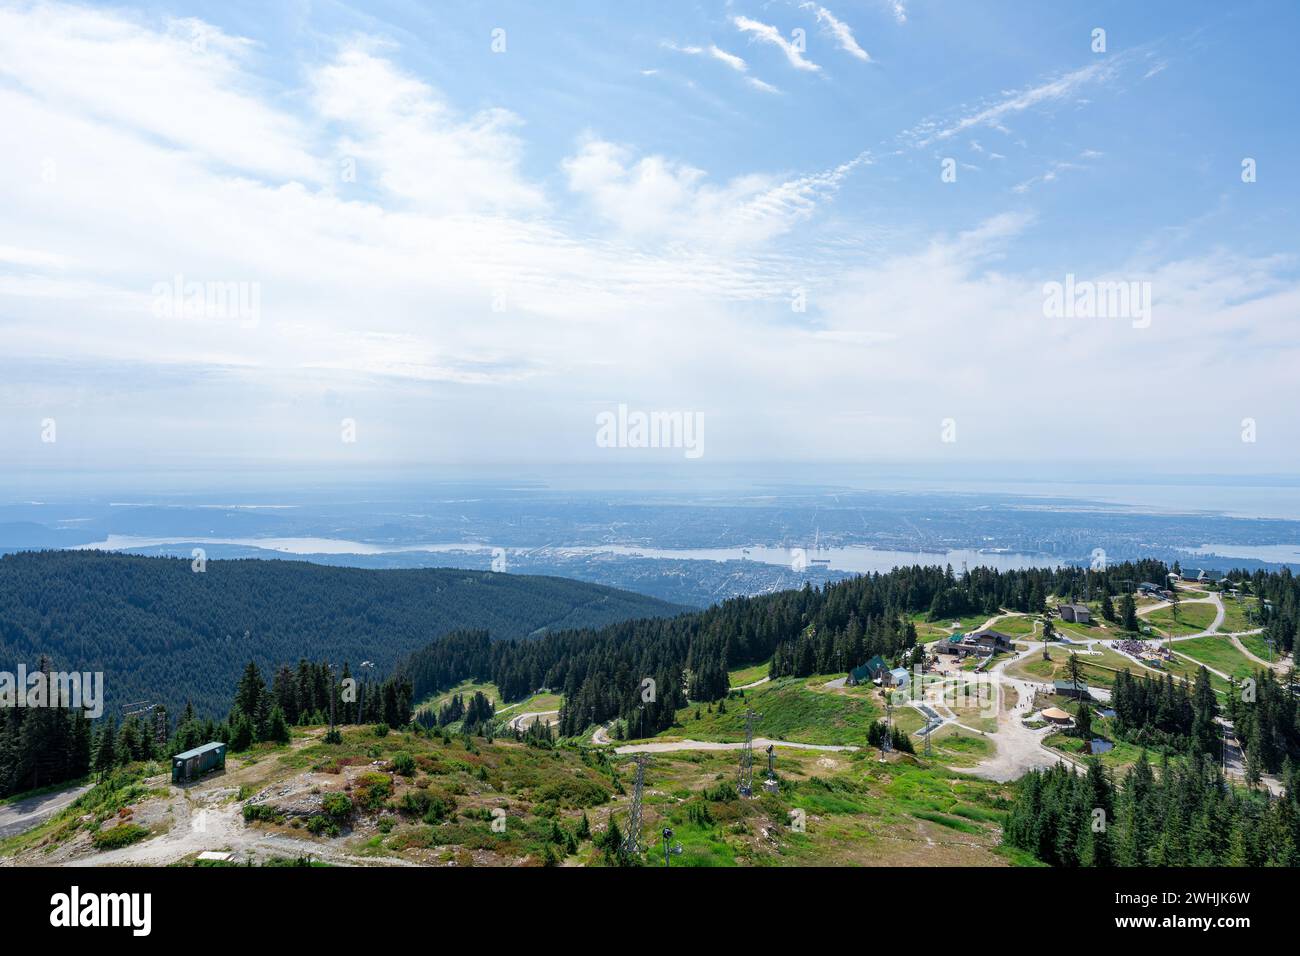 The view from the Grouse Mountain chairlift with Vancouver in the distant background. Stock Photo